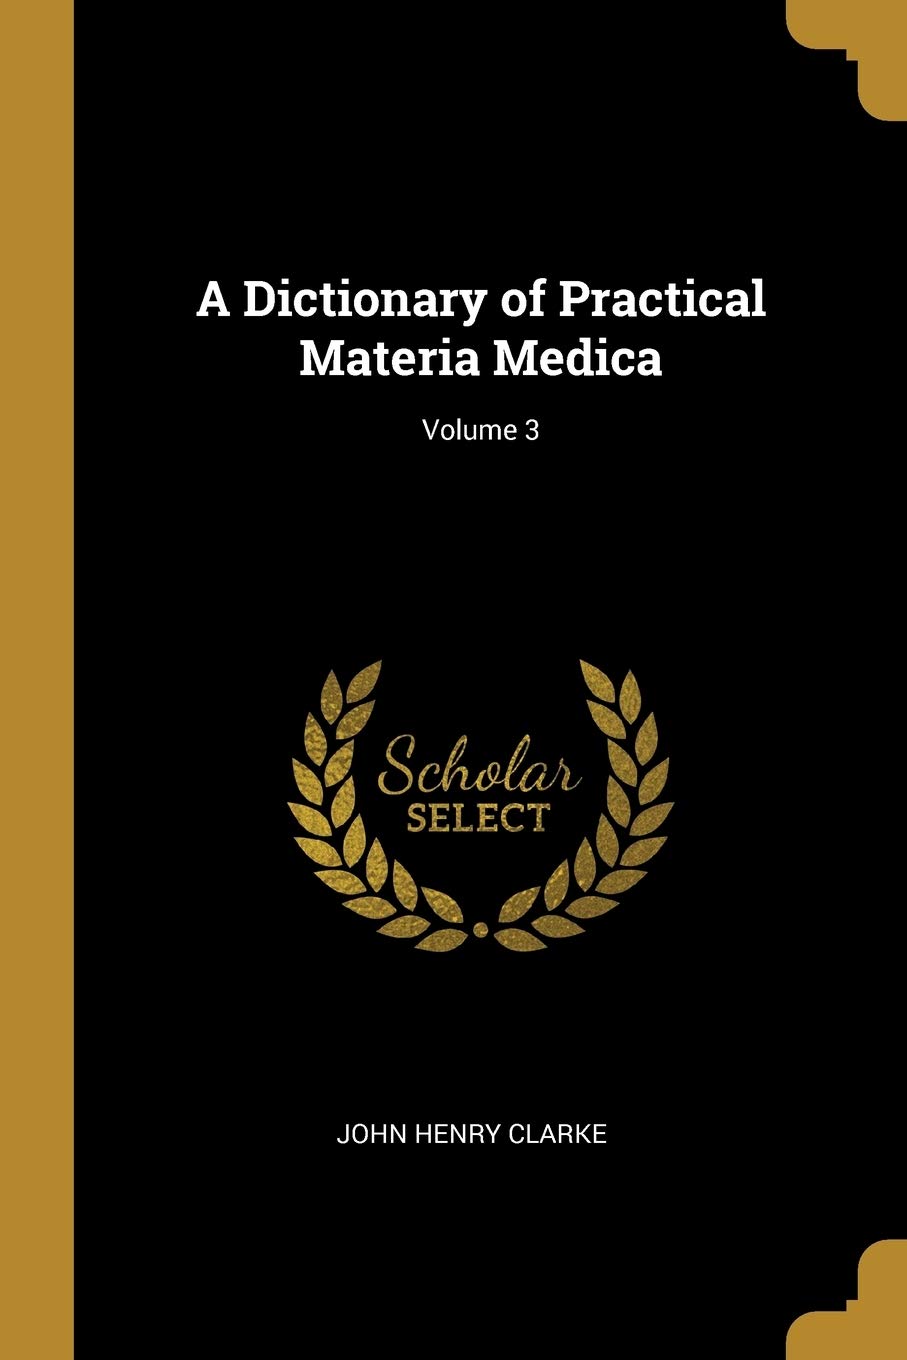 A DICTIONARY OF PRACTICAL MATERIA MEDICA VOLUME 3